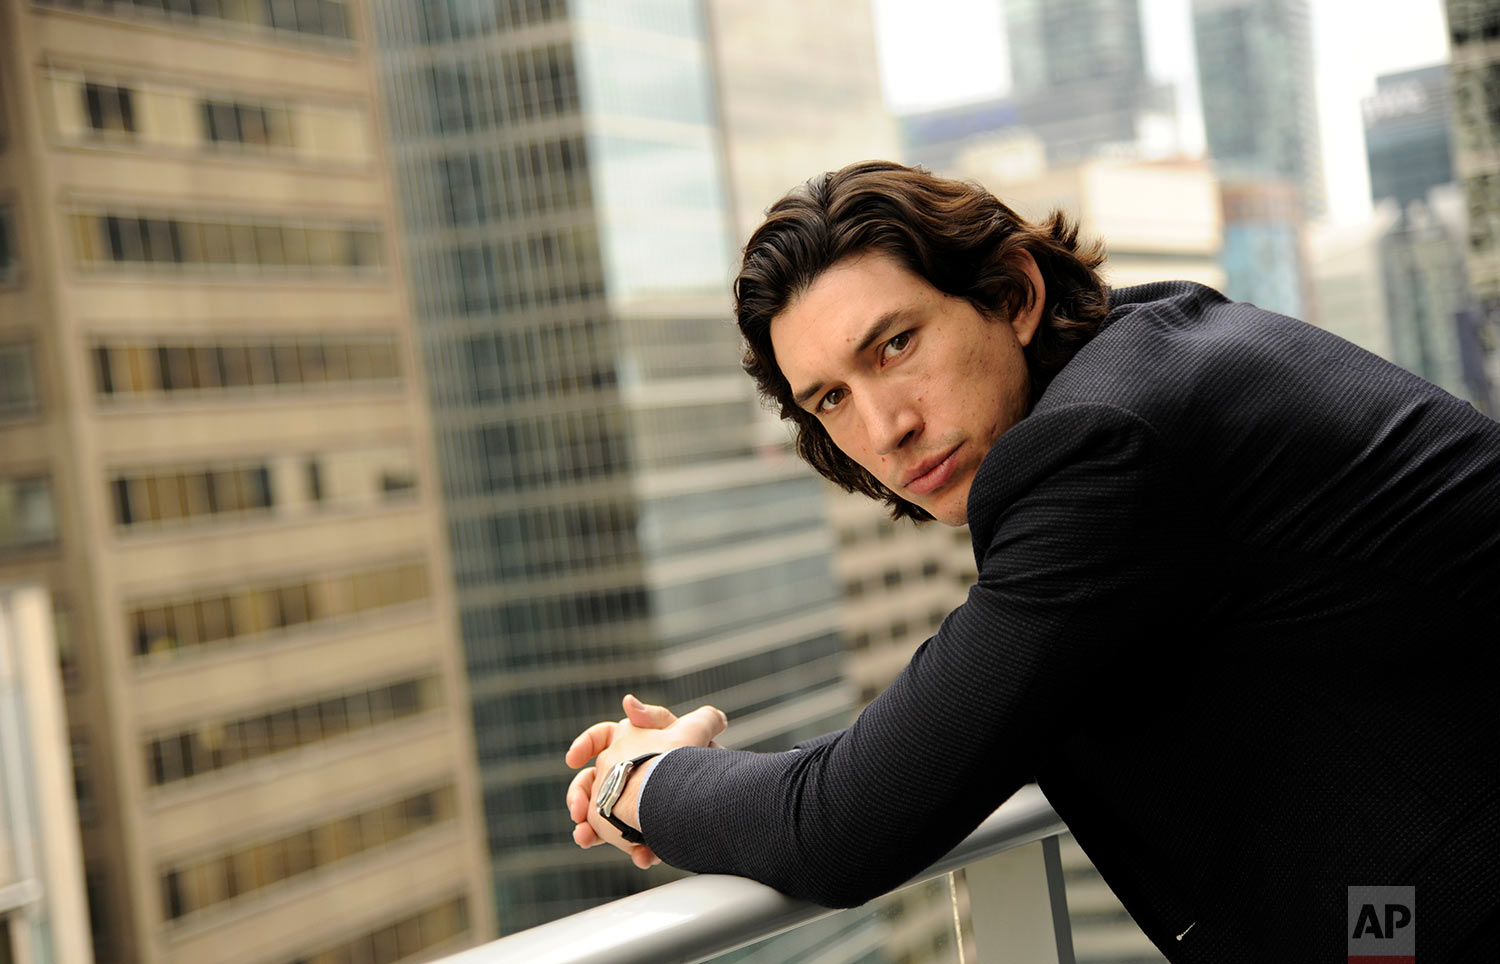  Actor Adam Driver poses for a portrait at the Shangri-La Hotel during the 2014 Toronto International Film Festival on Saturday, Sept. 6, 2014, in Toronto. (Photo by Chris Pizzello/Invision/AP) 